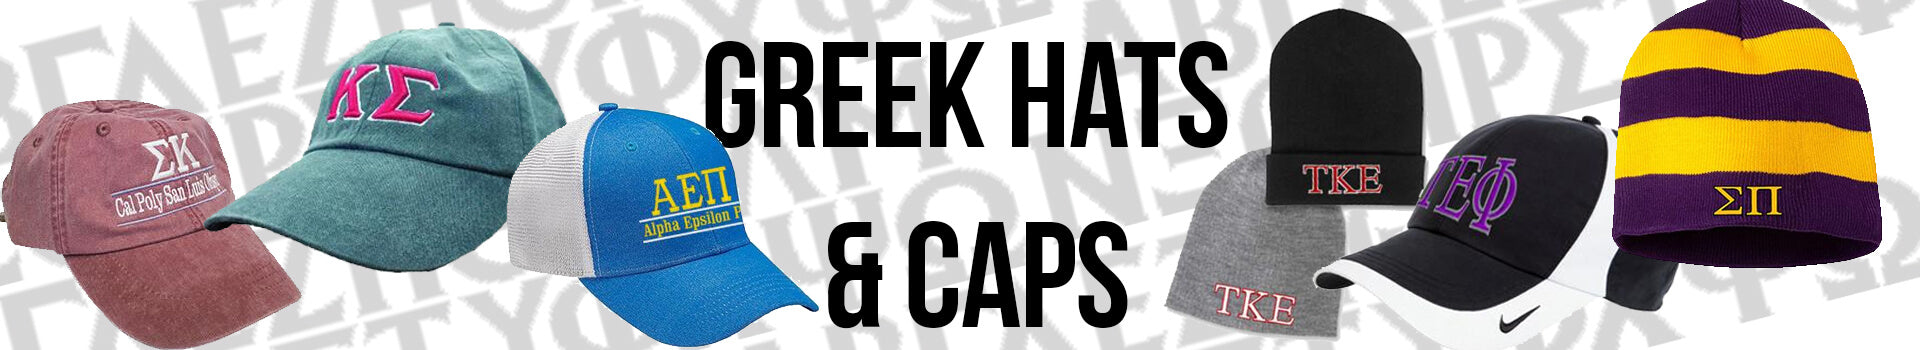 Custom Embroidered and Printed Greek Hats, Caps, and Visors for Fraternities and Sororities